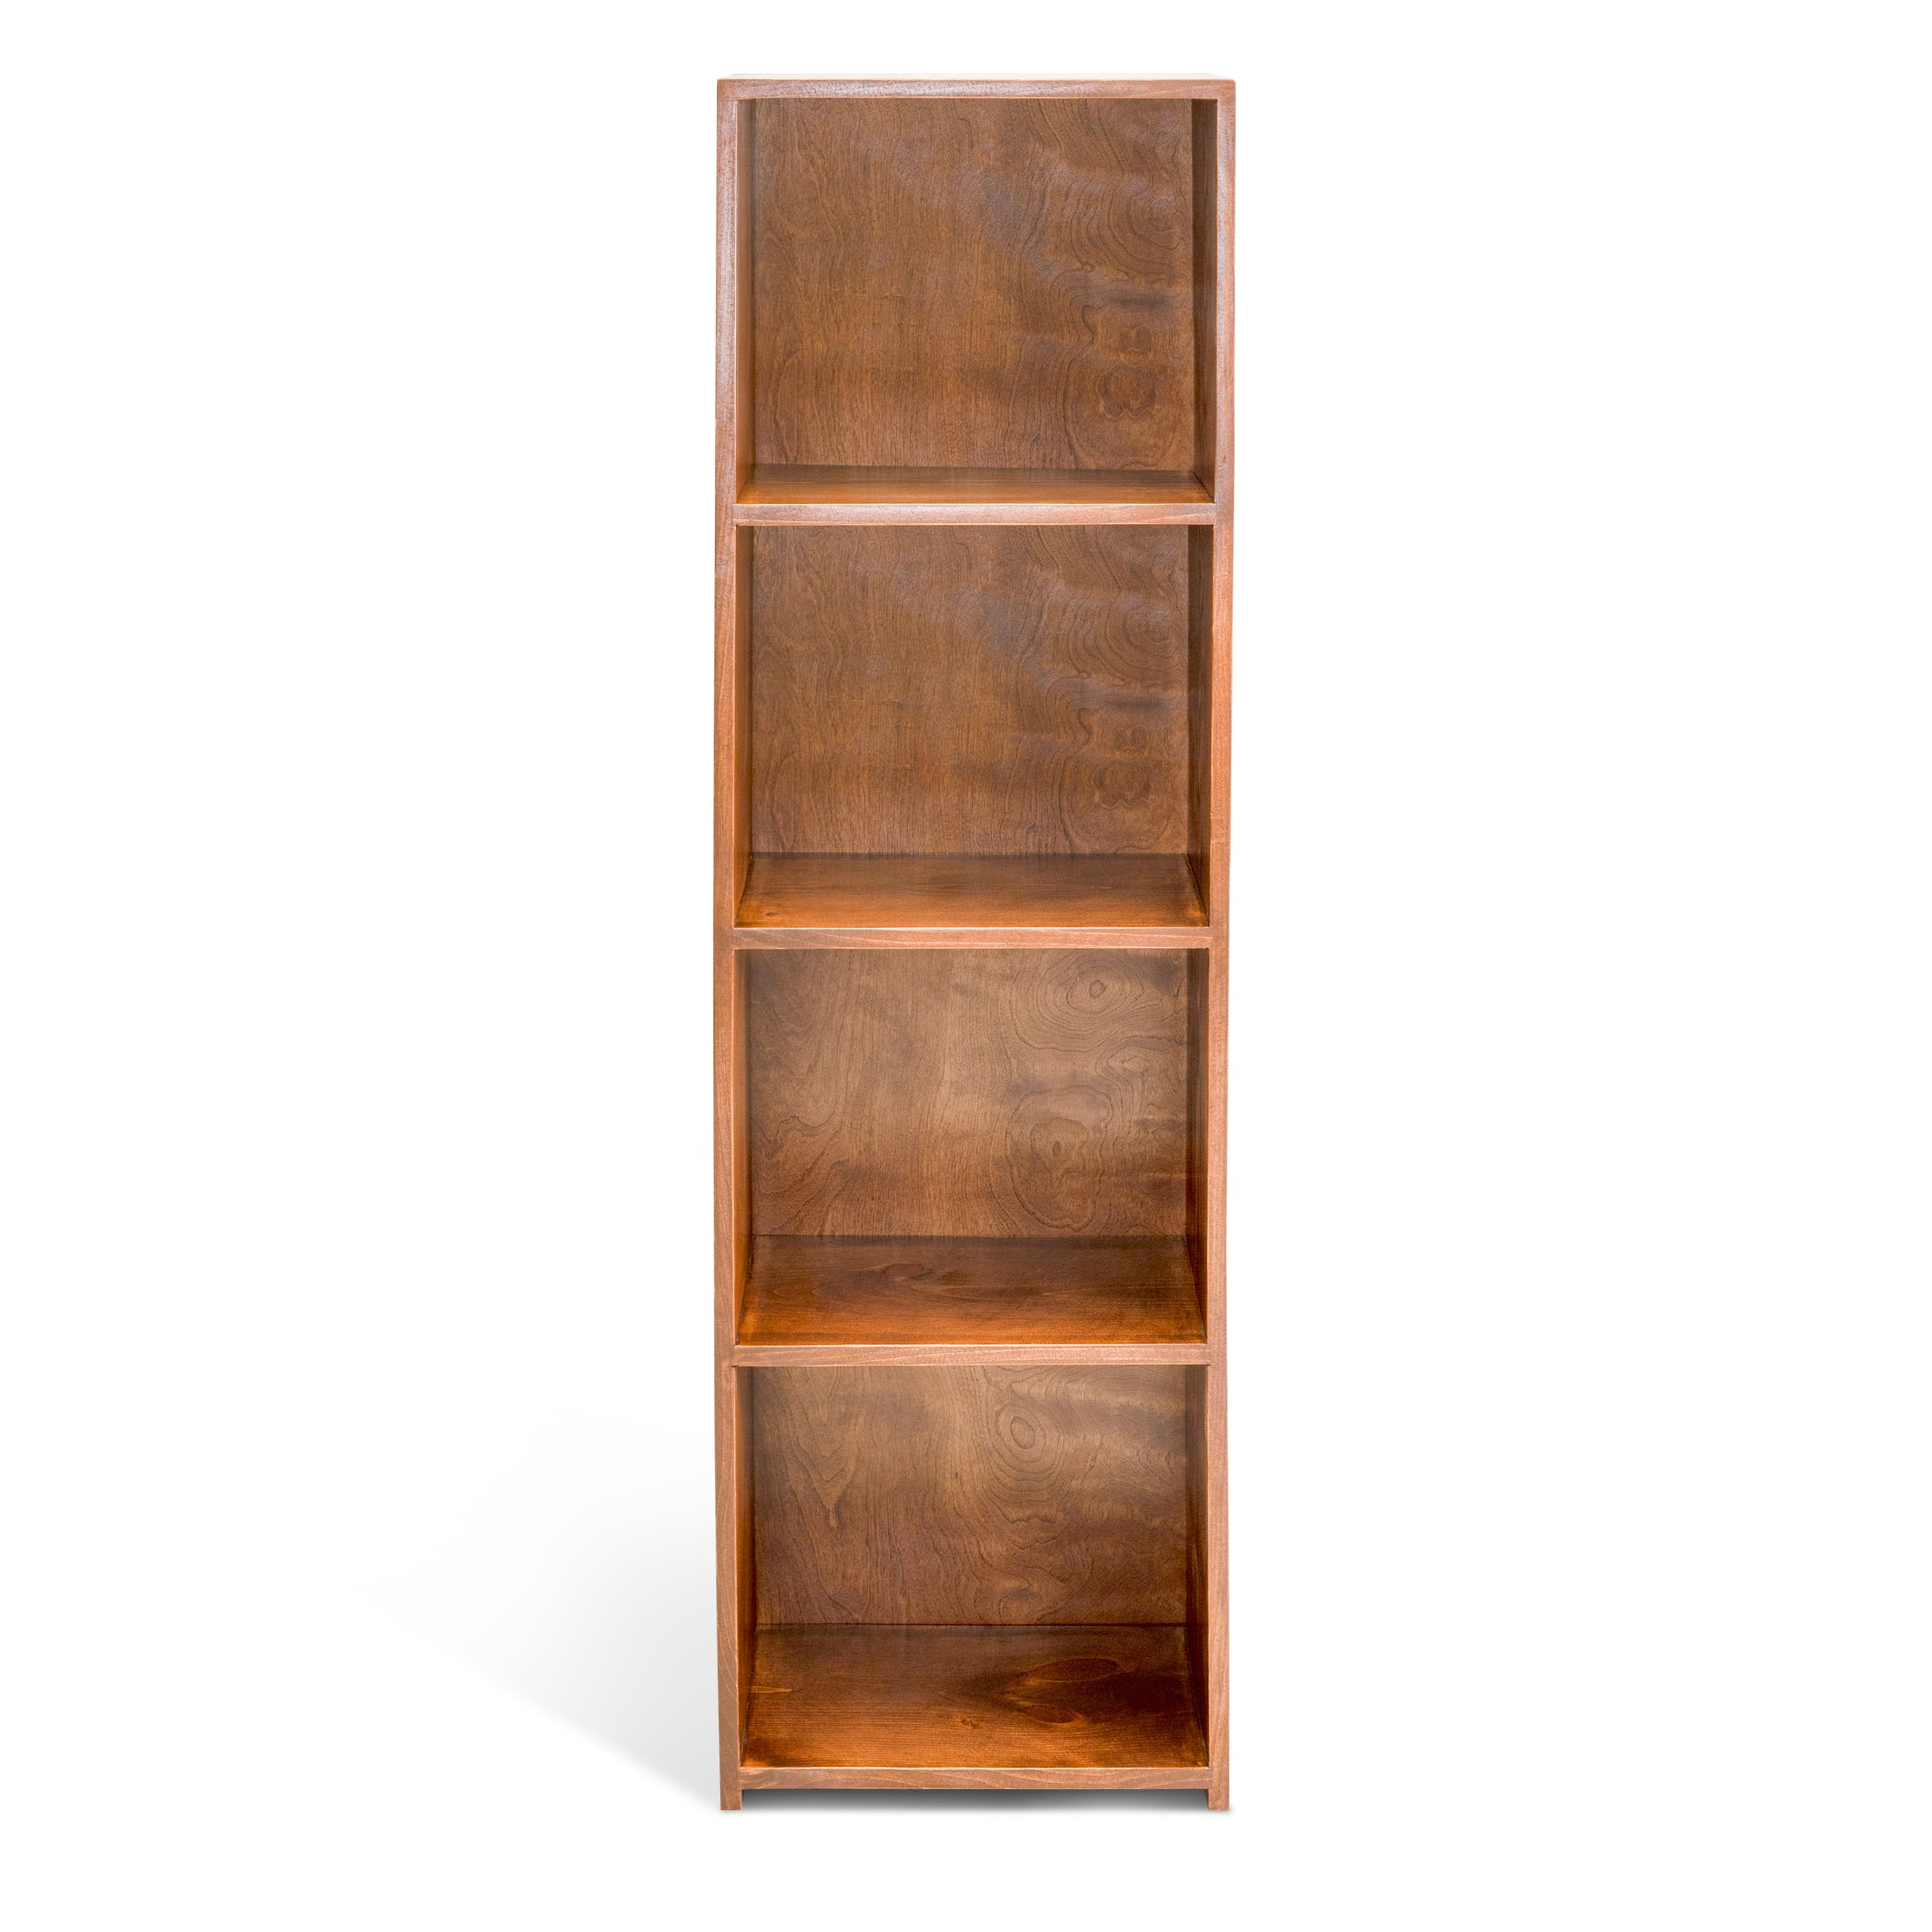 Evergreen Bookcase pictured in Country Pine finish.